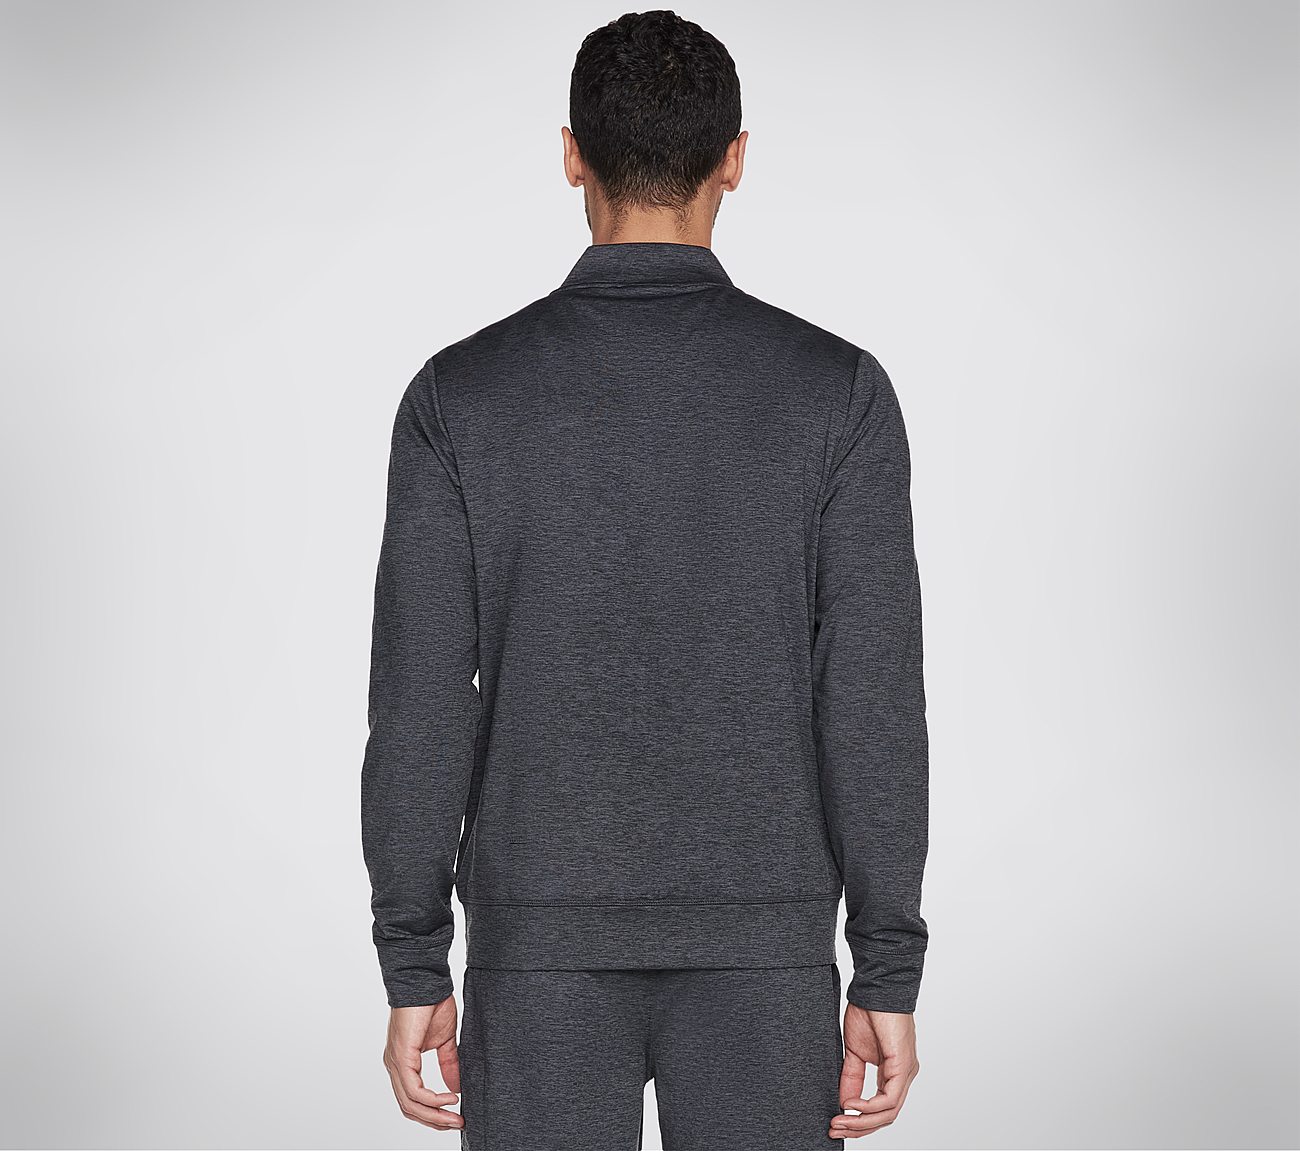 SKECH-KNITS ULTRA GO HOODLESS, CCHARCOAL Apparels Top View